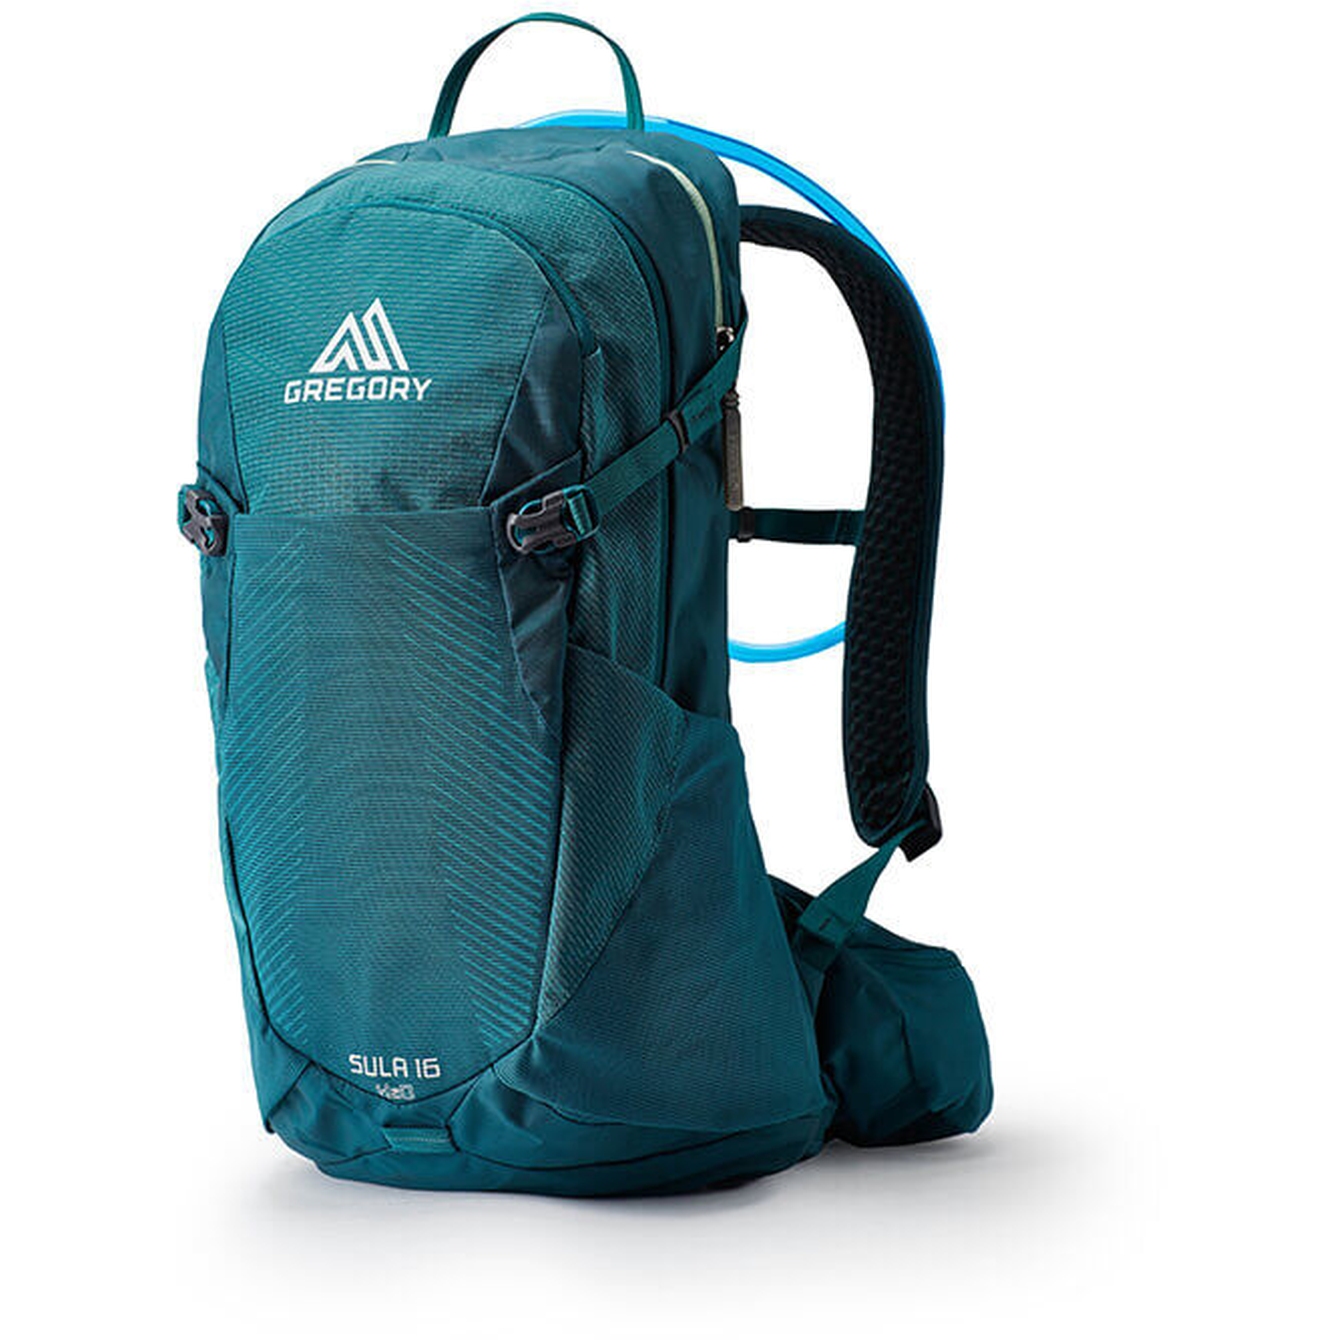 Image of Gregory Sula 16 H2O Women's Backpack - Antigua Green